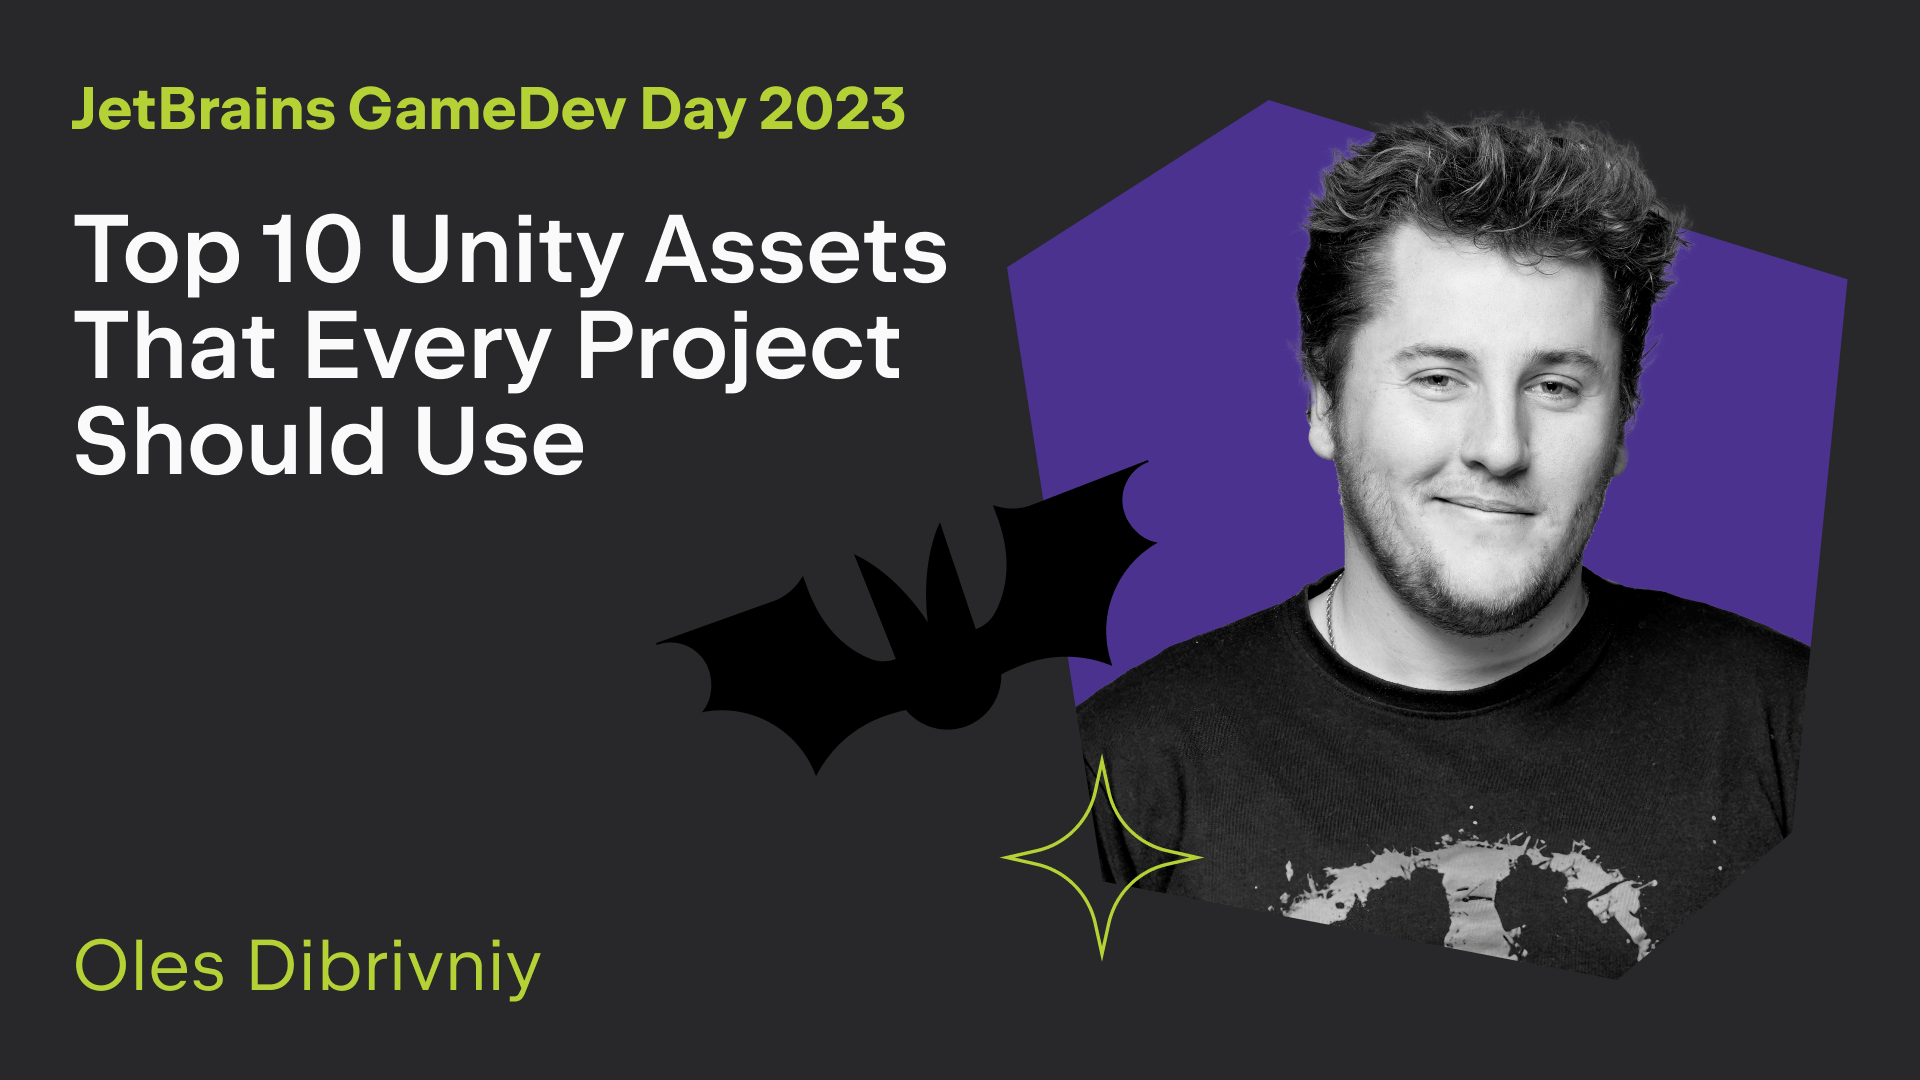 Top 10 Unity Assets That Every Project Should Use